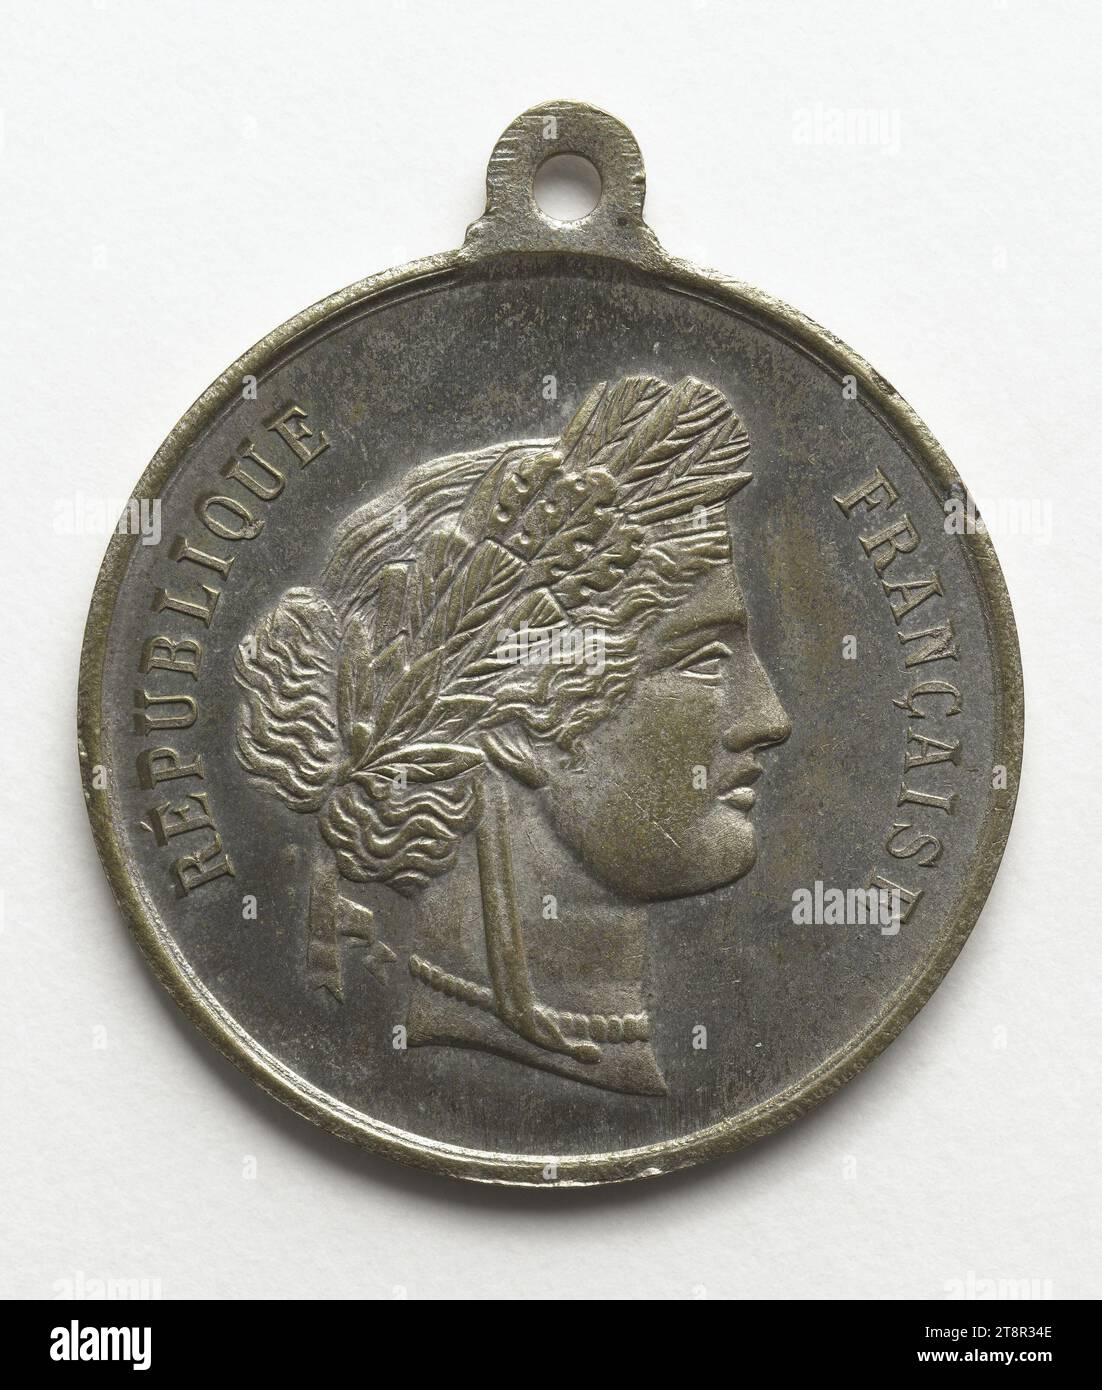 Musical contest, regional agricultural contest and inauguration of the statue of Jacques Coeur in Bourges, May 11-18, 1879, In 1879, Numismatic, Medal, Copper, Silver plated = silver plating, Dimensions - Work: Diameter: 3.2 cm, Weight (type dimension): 7.93 g Stock Photo